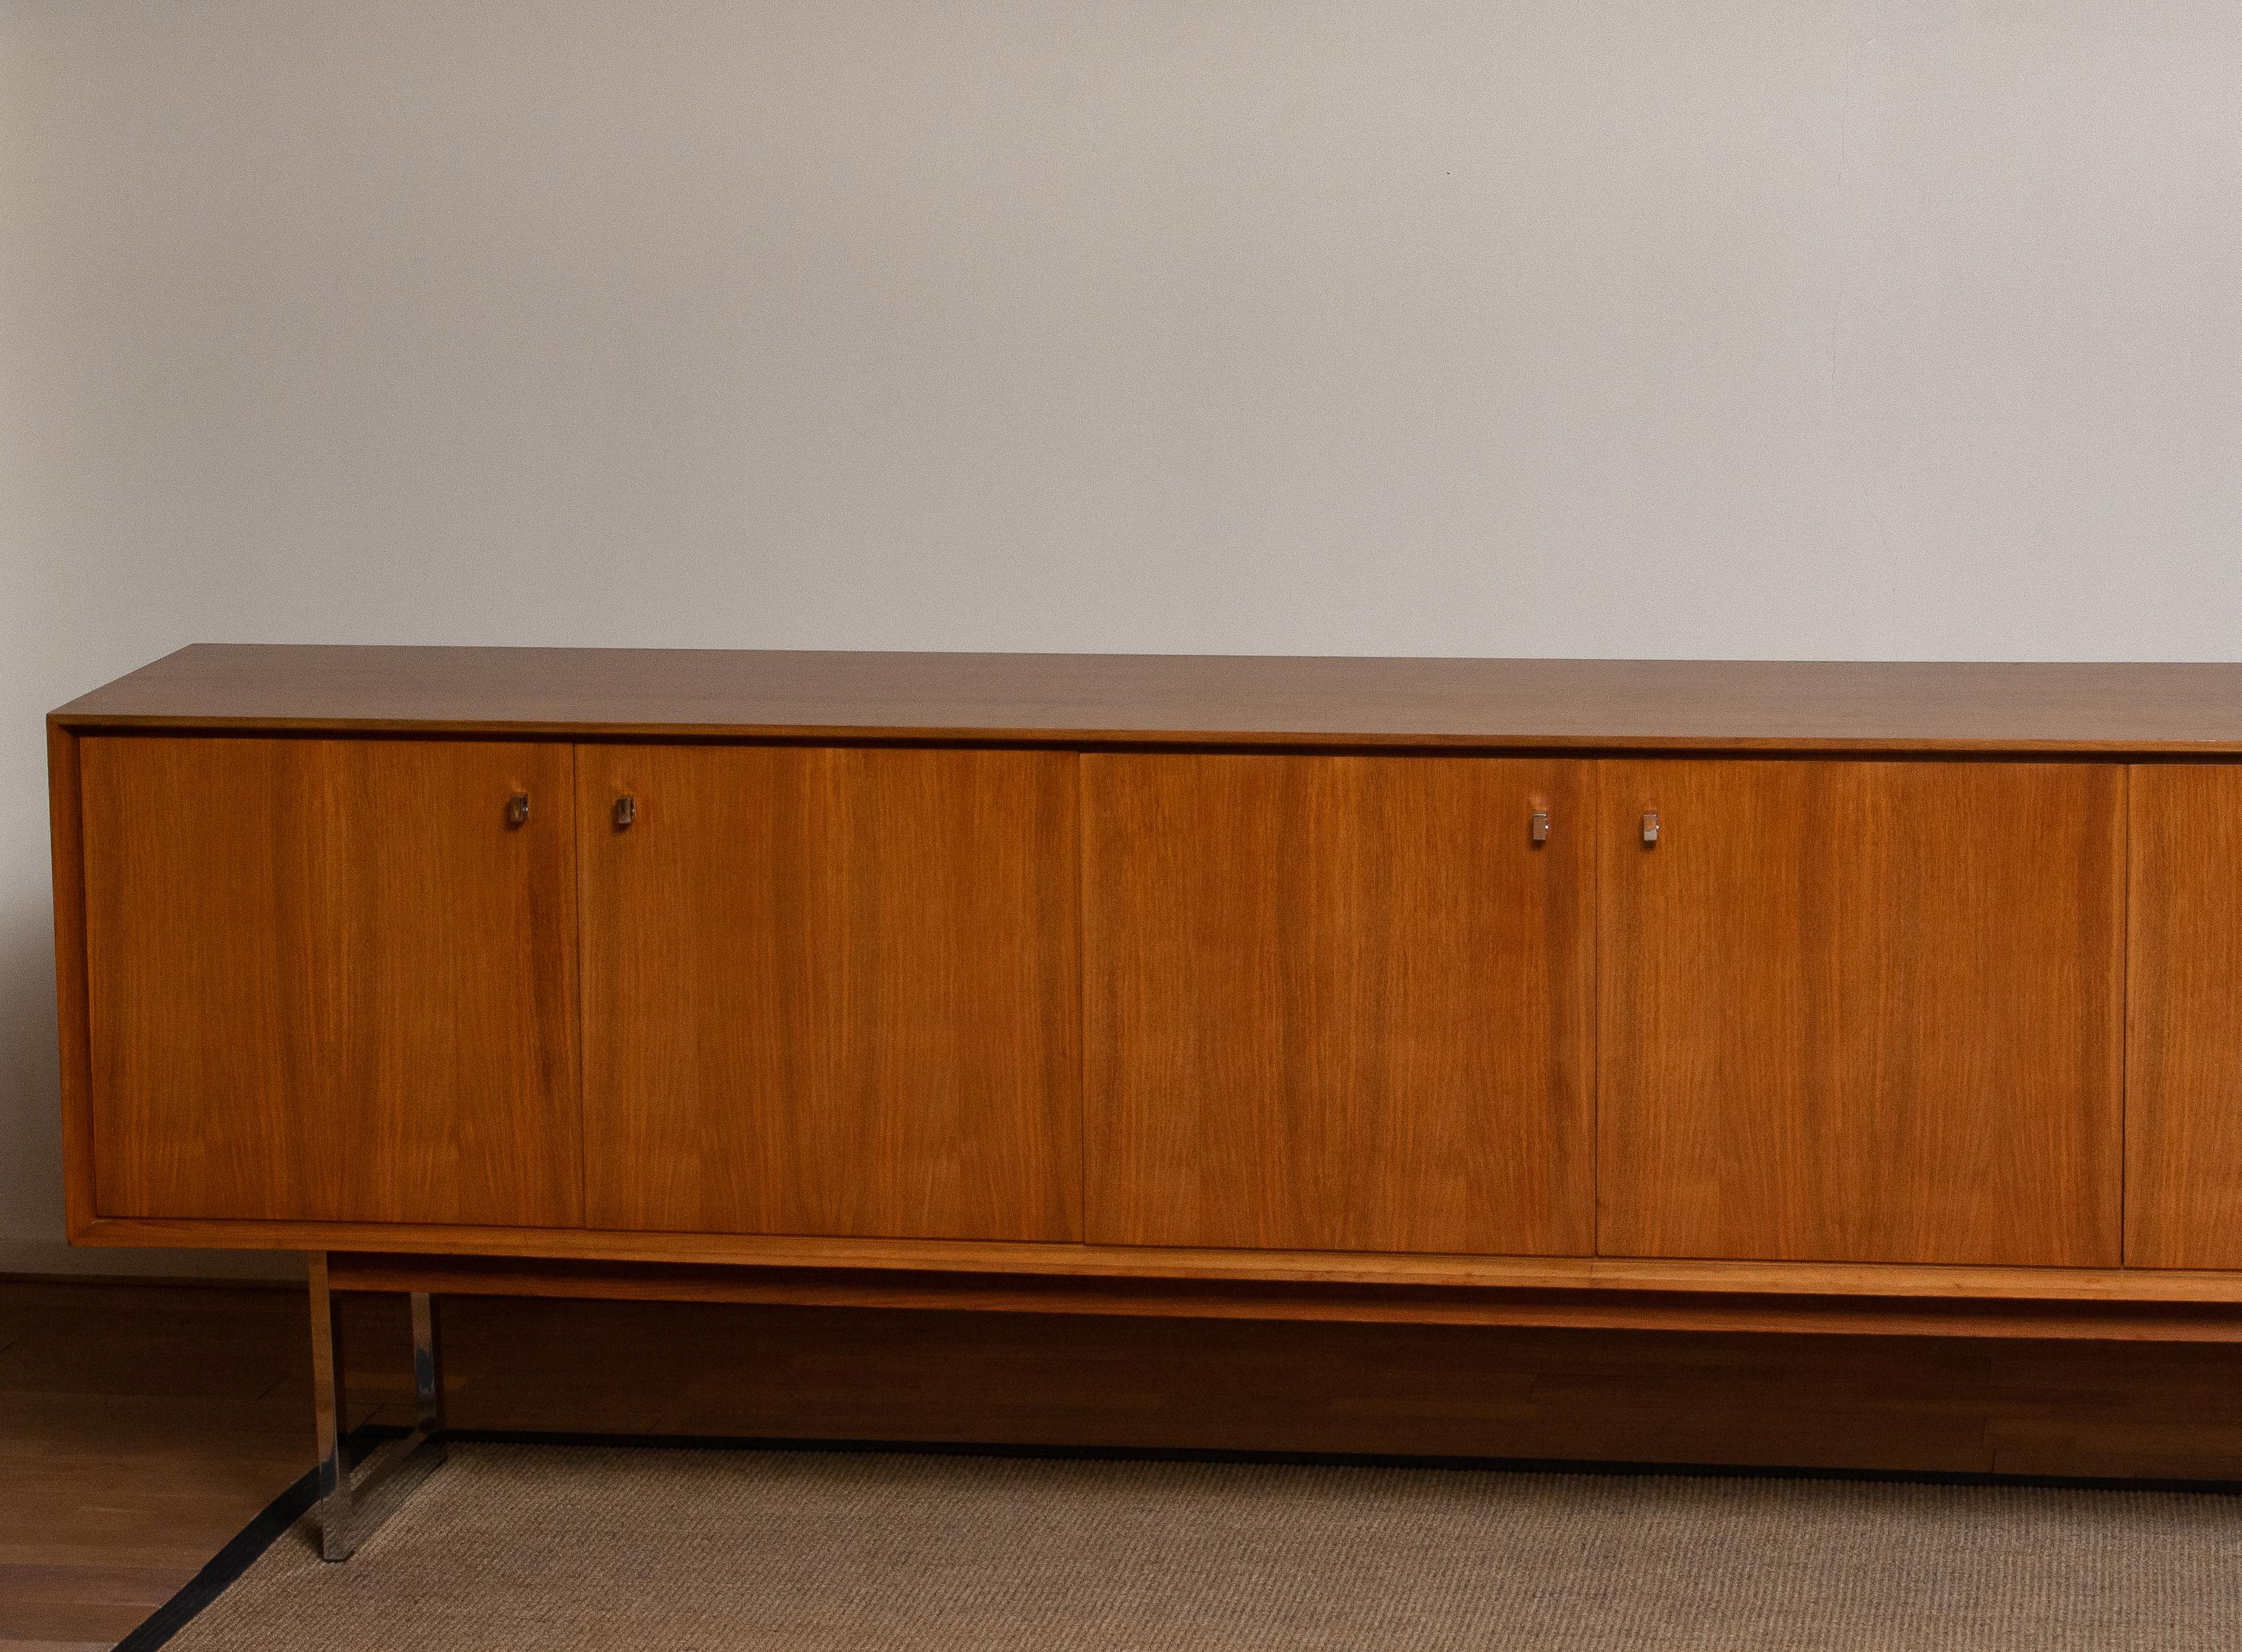 1970, Wide Credenzas Sideboard in Walnut with Chrome Handles and Legs 4